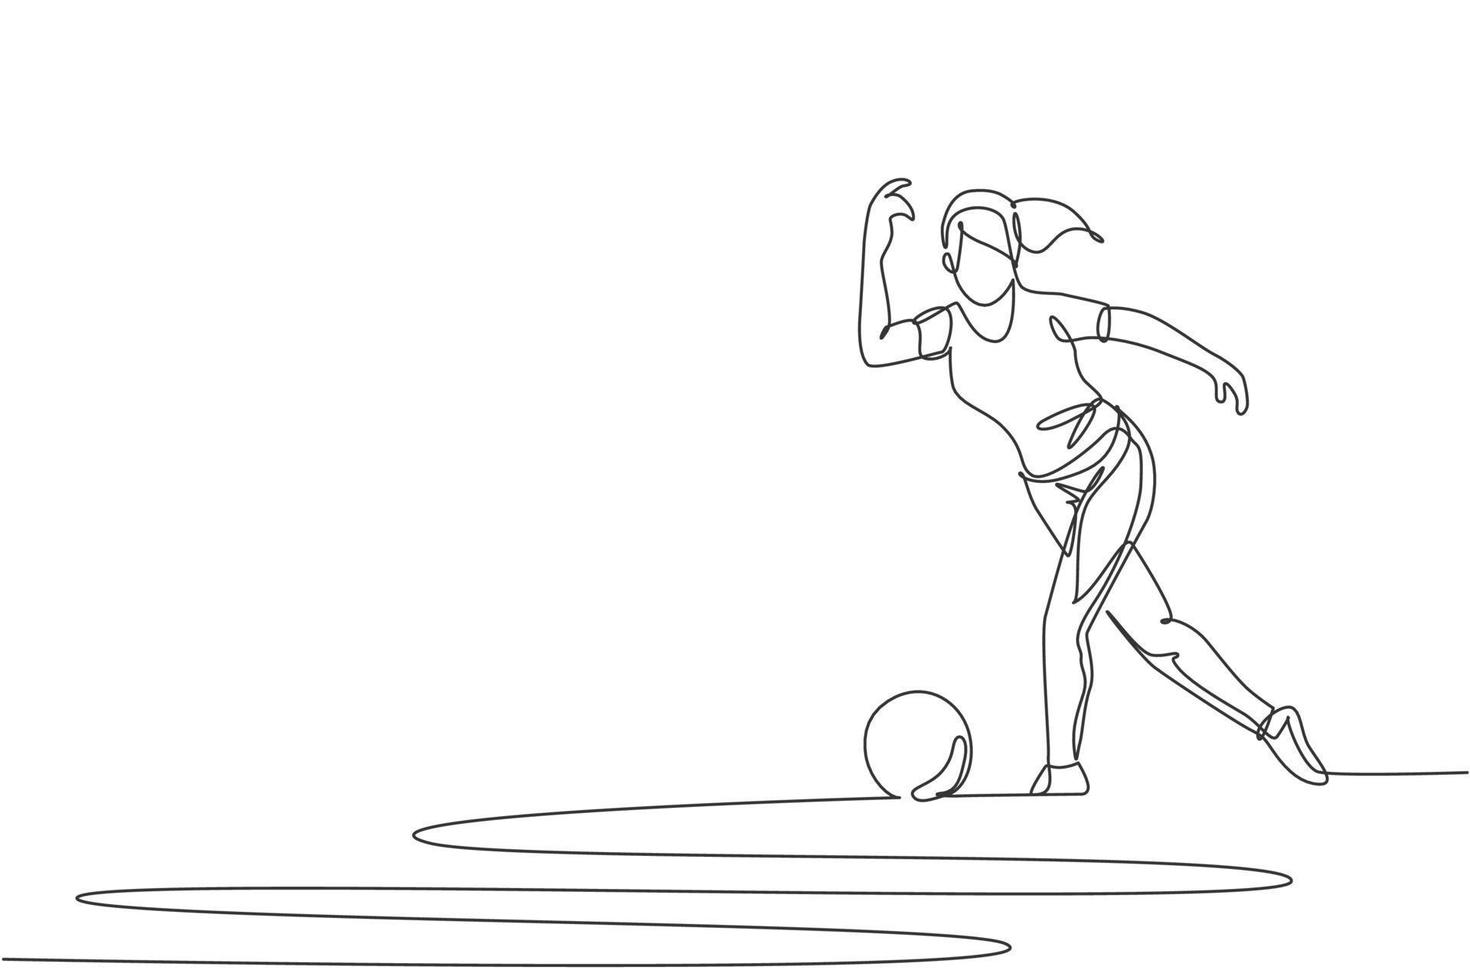 Single continuous line drawing young happy bowling player woman throw bowling ball to hit the pins. Doing sport hobby at leisure time concept. Trendy one line draw design vector illustration graphic